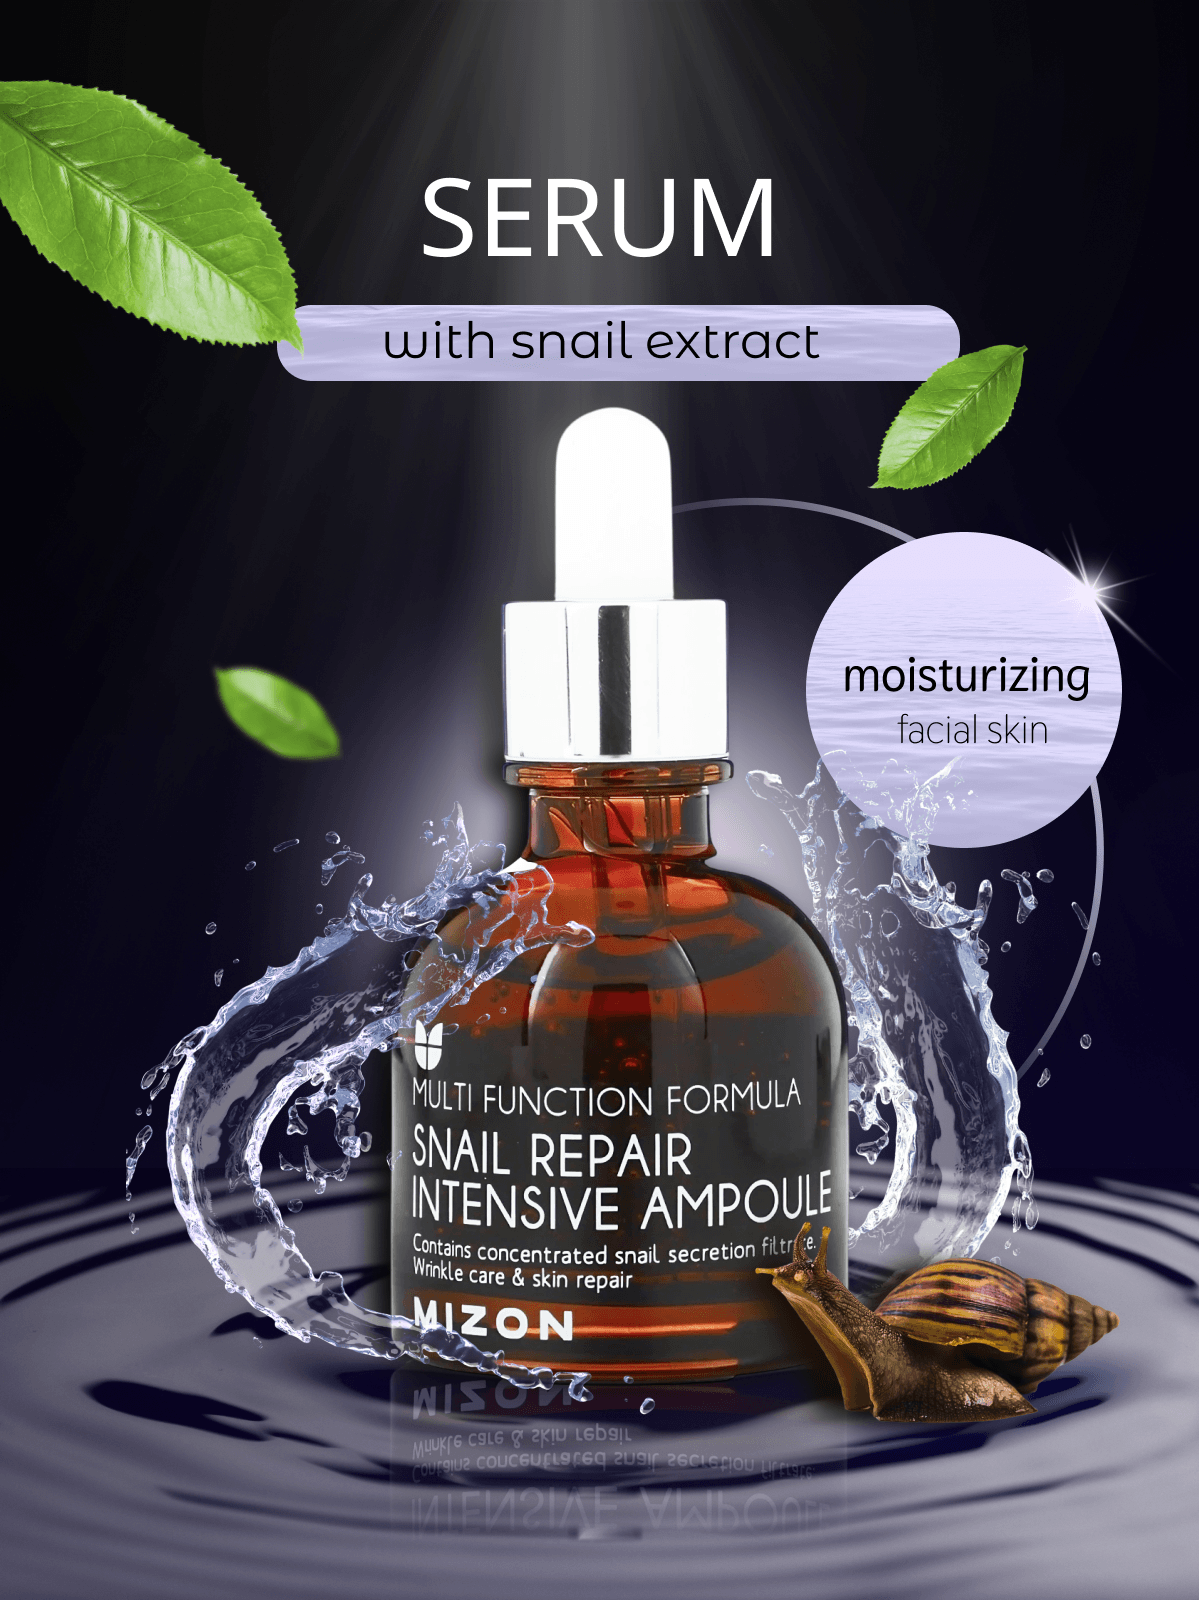 Serum with snale extract